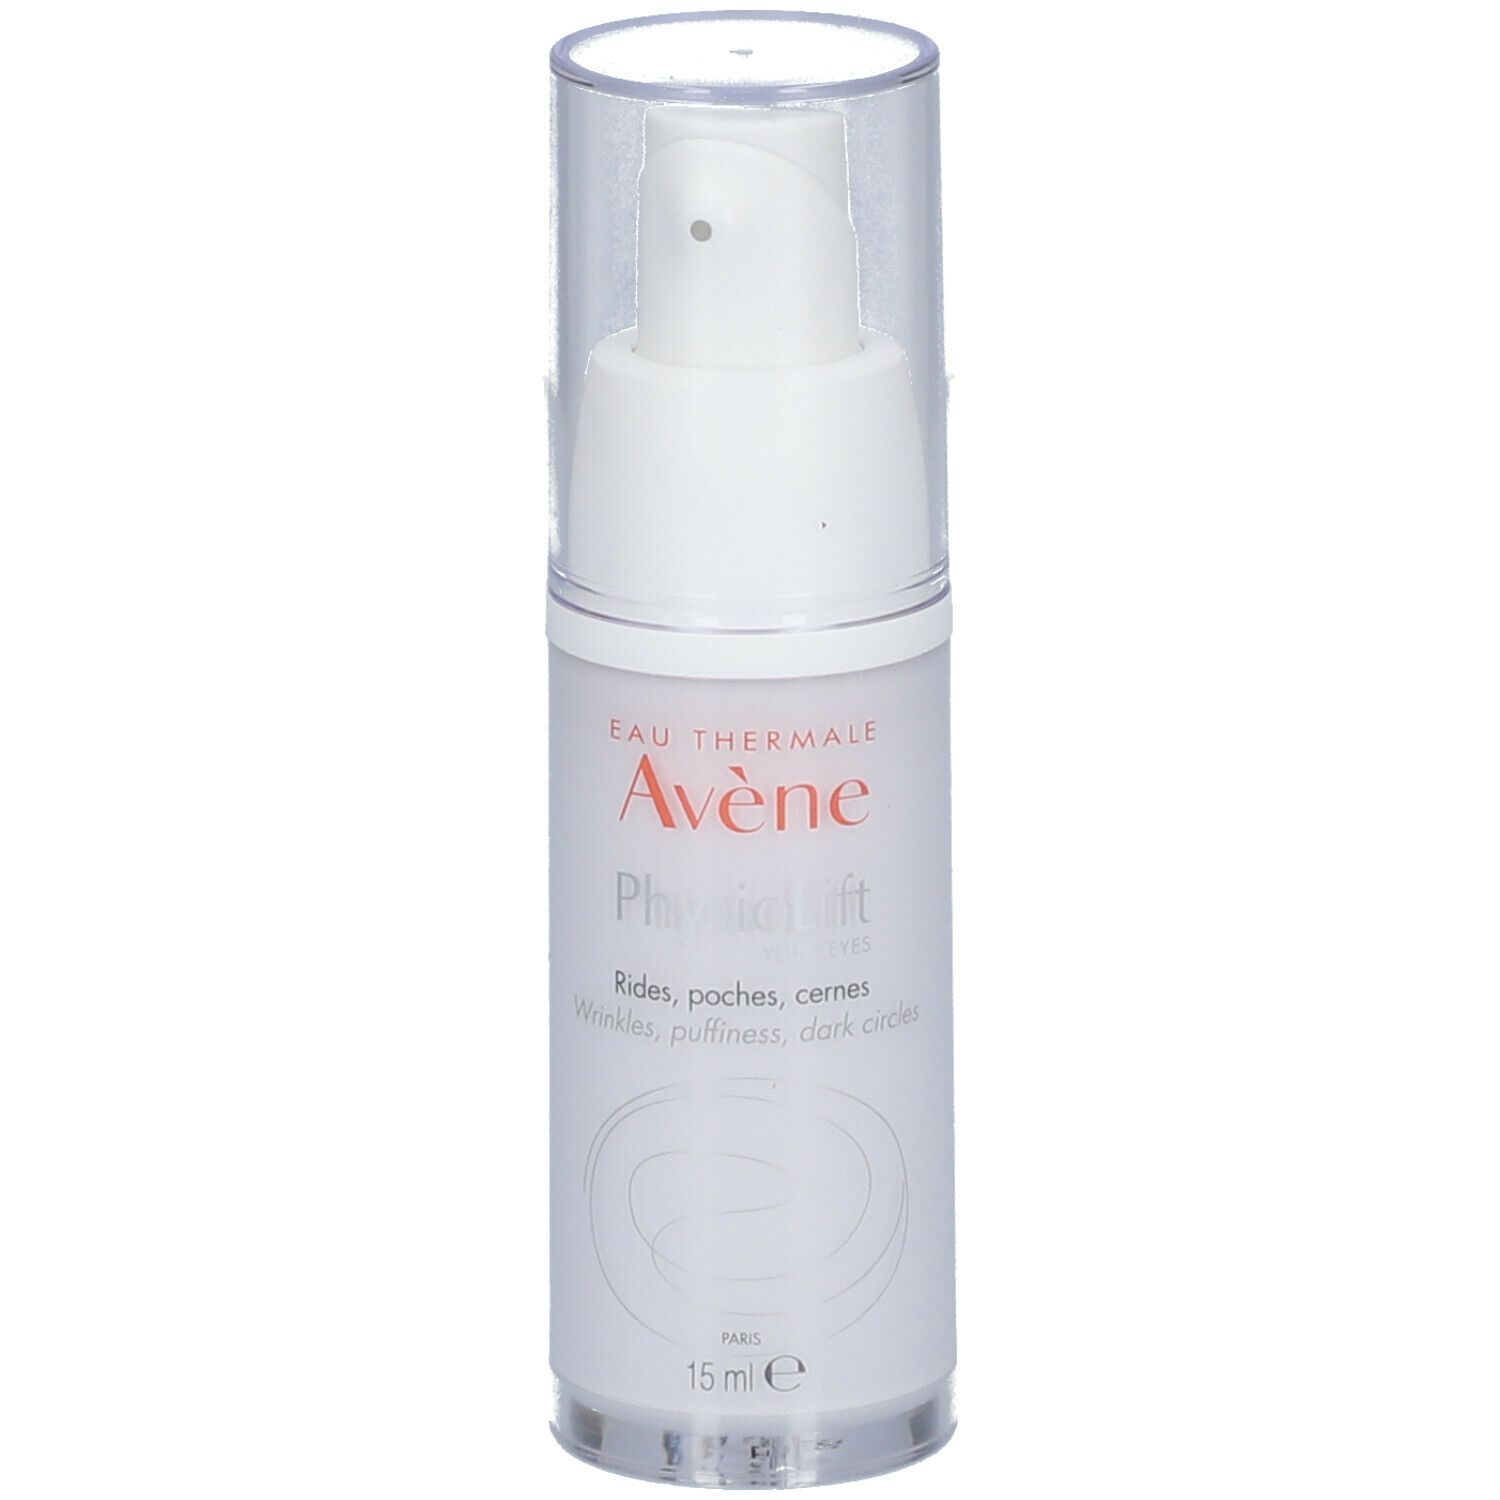 Avène PhysioLift Yeux rides, poches, cernes